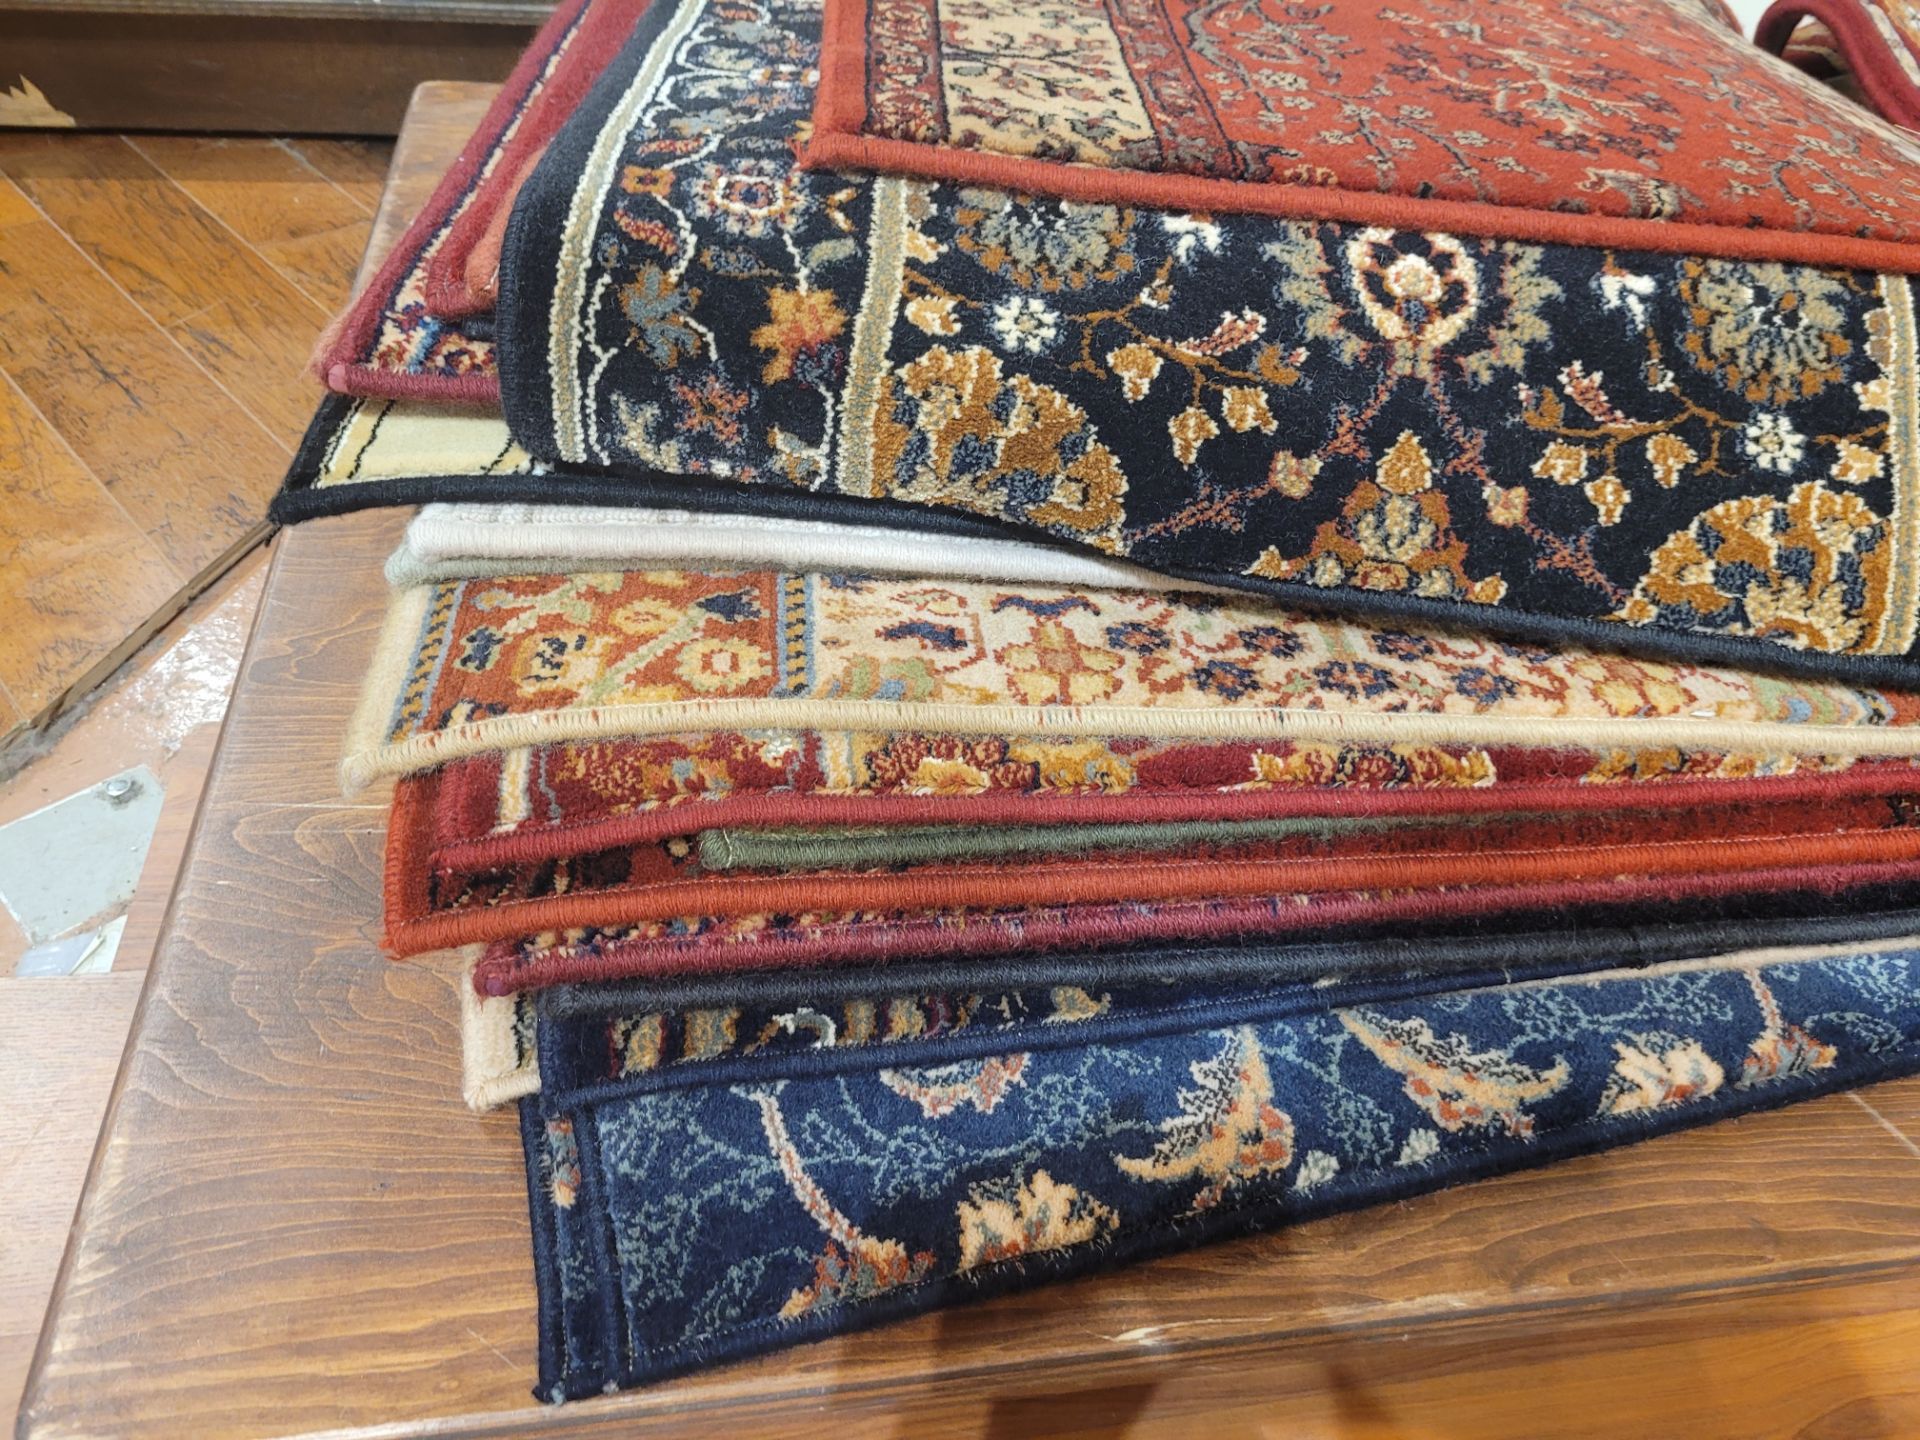 LOT - ASSORTED RUGS, SAMPLES, ETC. - Image 2 of 4